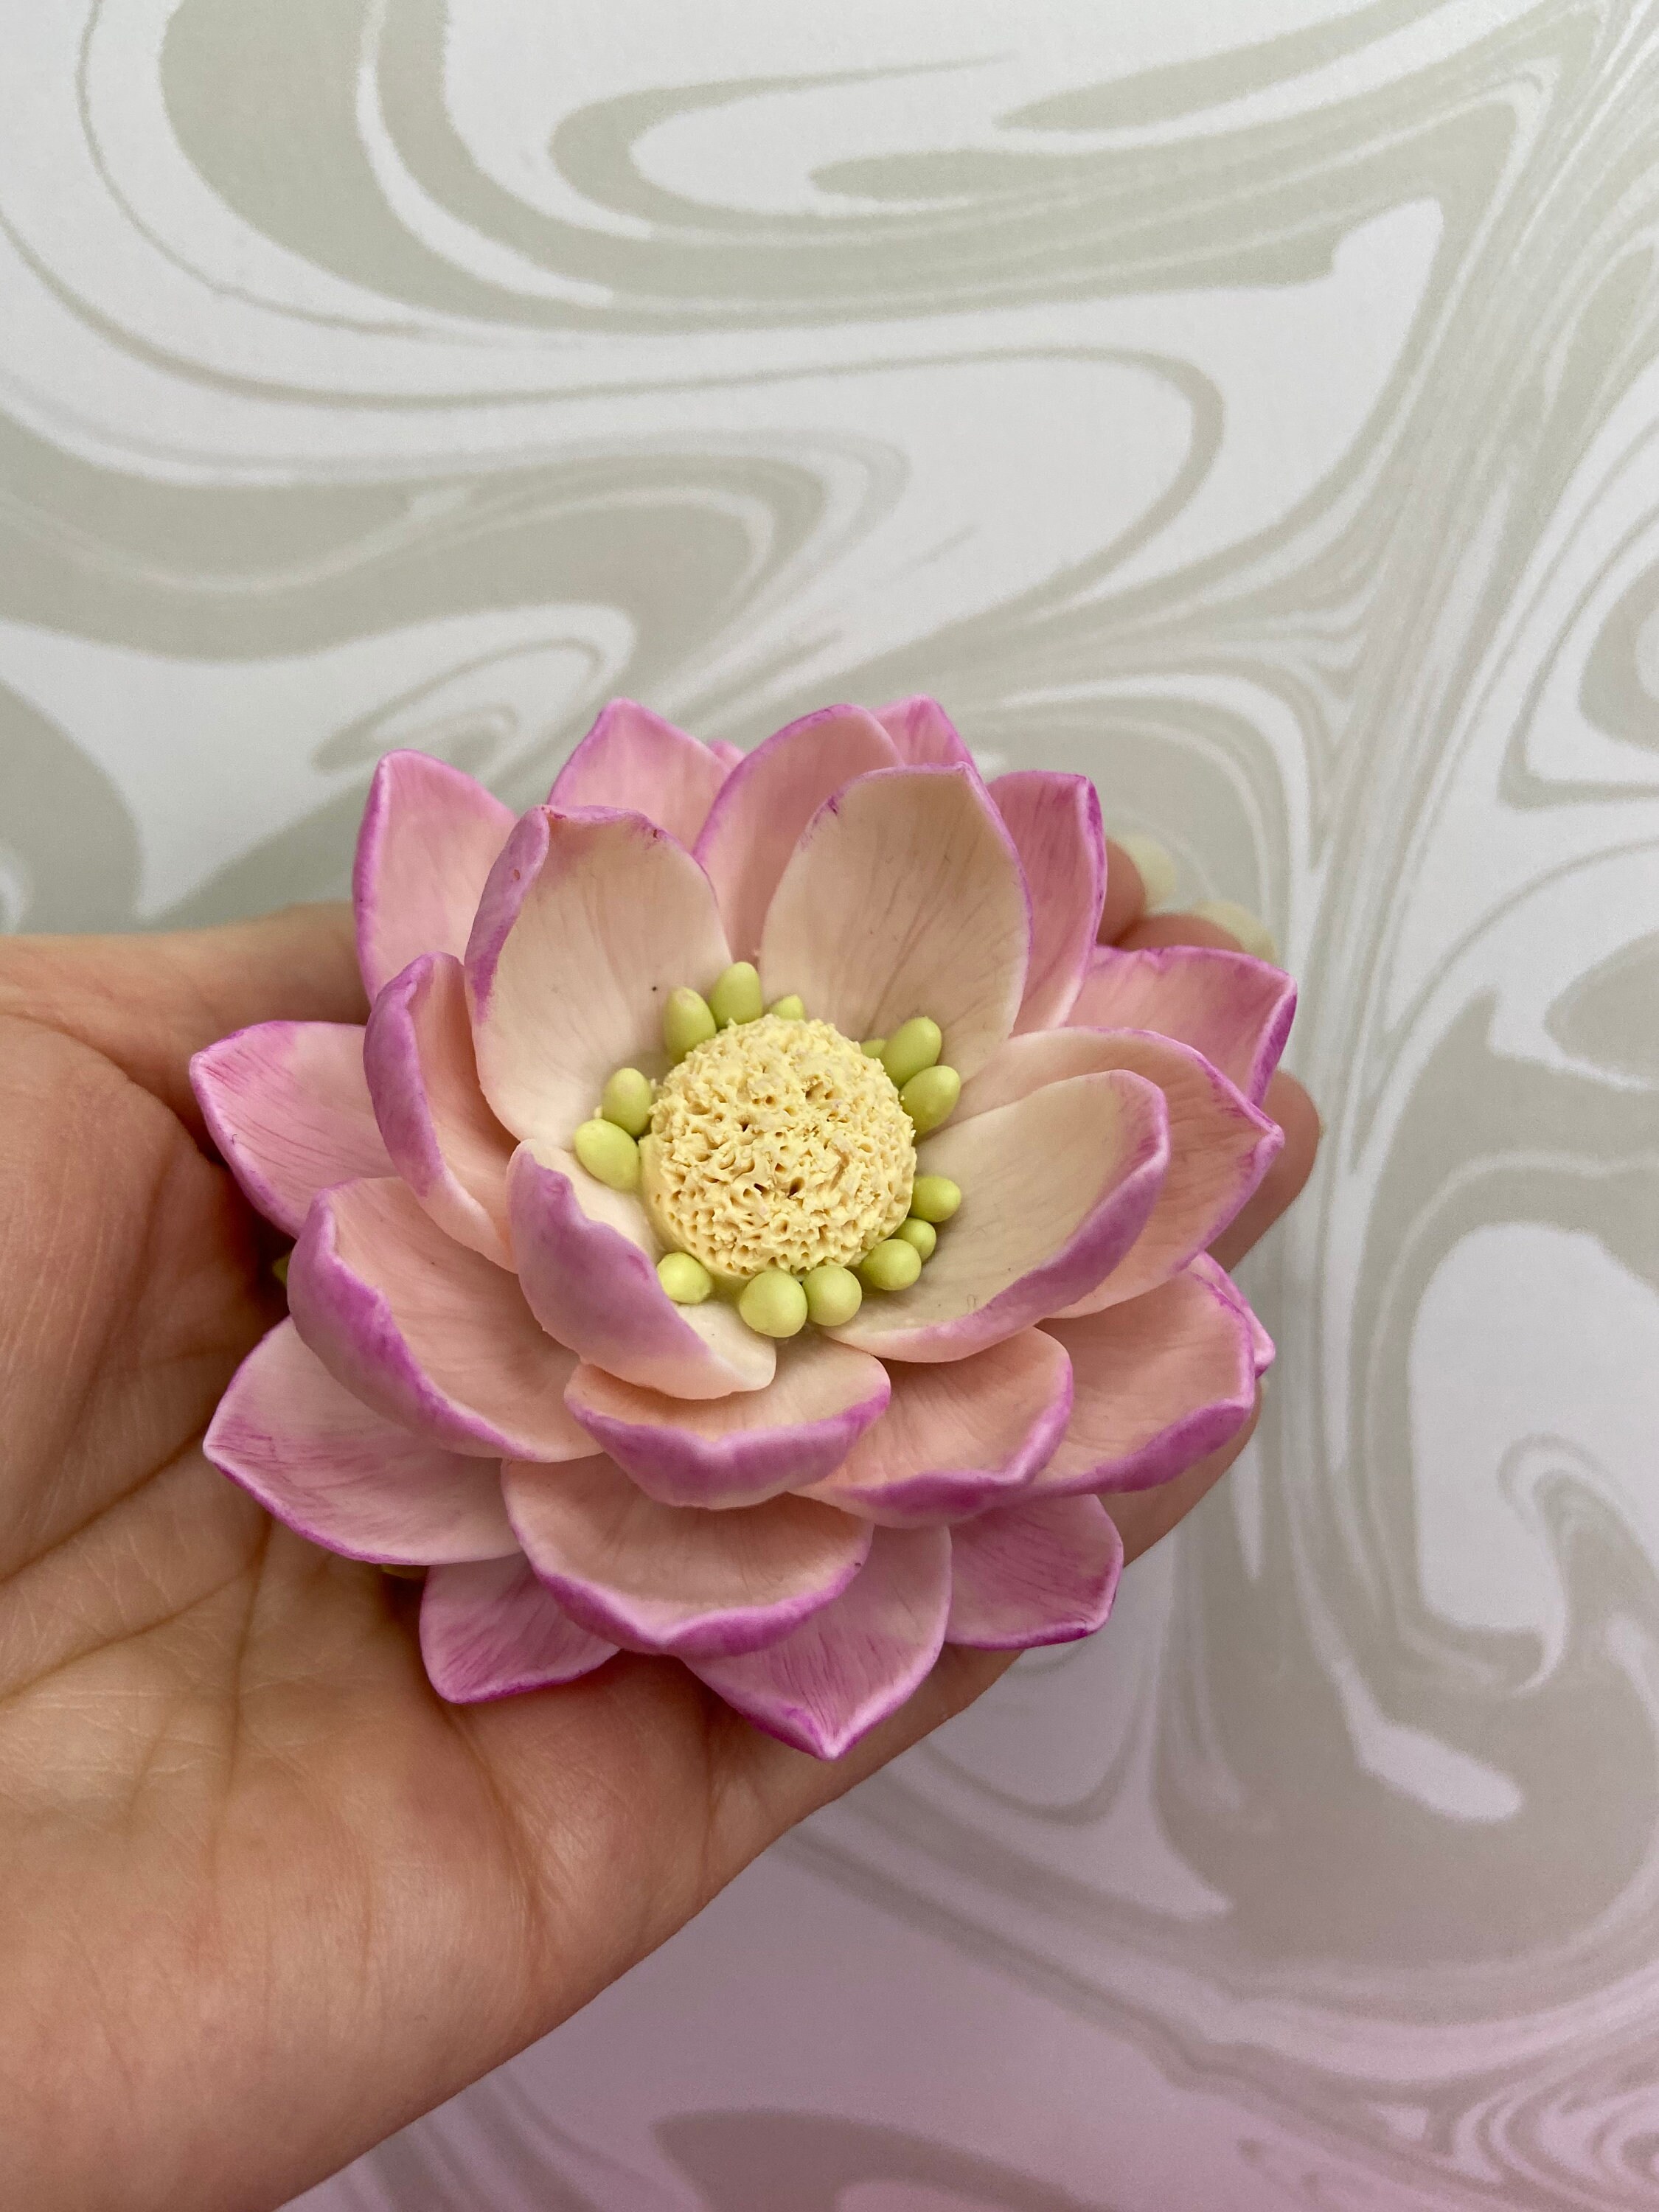 Candle Making Supplies: Silicone Molds Of Lotus – Colikes